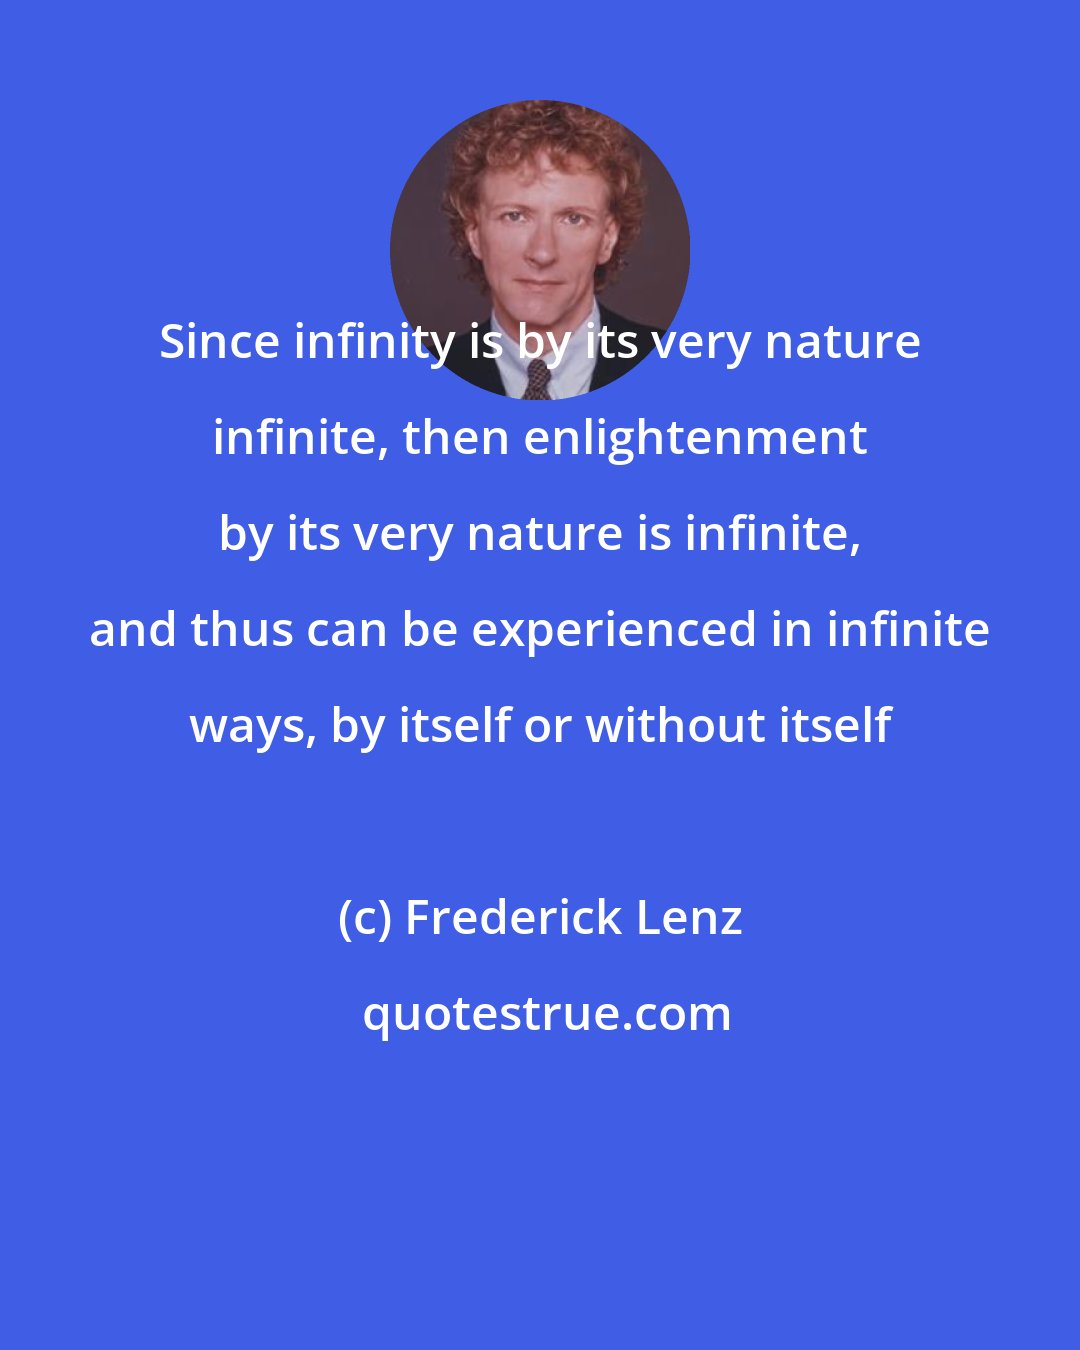 Frederick Lenz: Since infinity is by its very nature infinite, then enlightenment by its very nature is infinite, and thus can be experienced in infinite ways, by itself or without itself